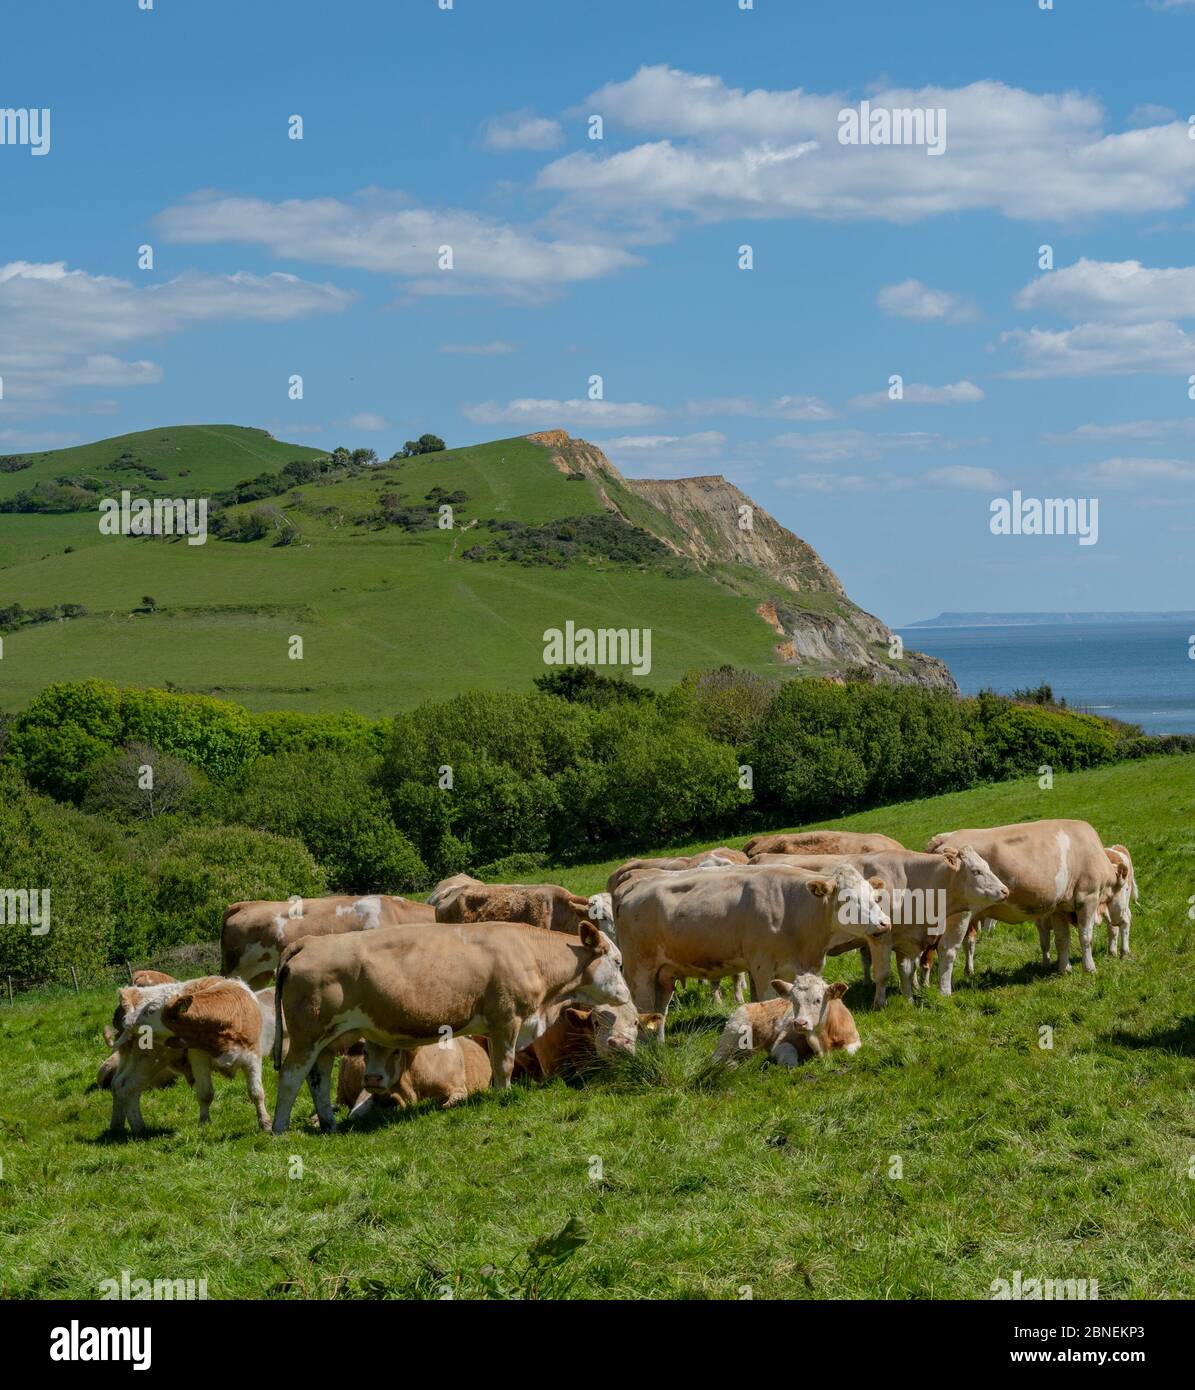 Golden Cap, West Dorset, UK. 14th May 2020. UK Weather: The view along the coast towards Abbotsbury and the Isle of Portland from Golden Cap. Cows and calves graze on Golden Cap on a sunny, but somewhat chilly afternoon. The popular beauty spot is quieter than usual in spite of the Government easing of the coronavirus restrictions which allows greater freedom to travel for exercise. Credit: Celia McMahon/Alamy Live News. Stock Photo